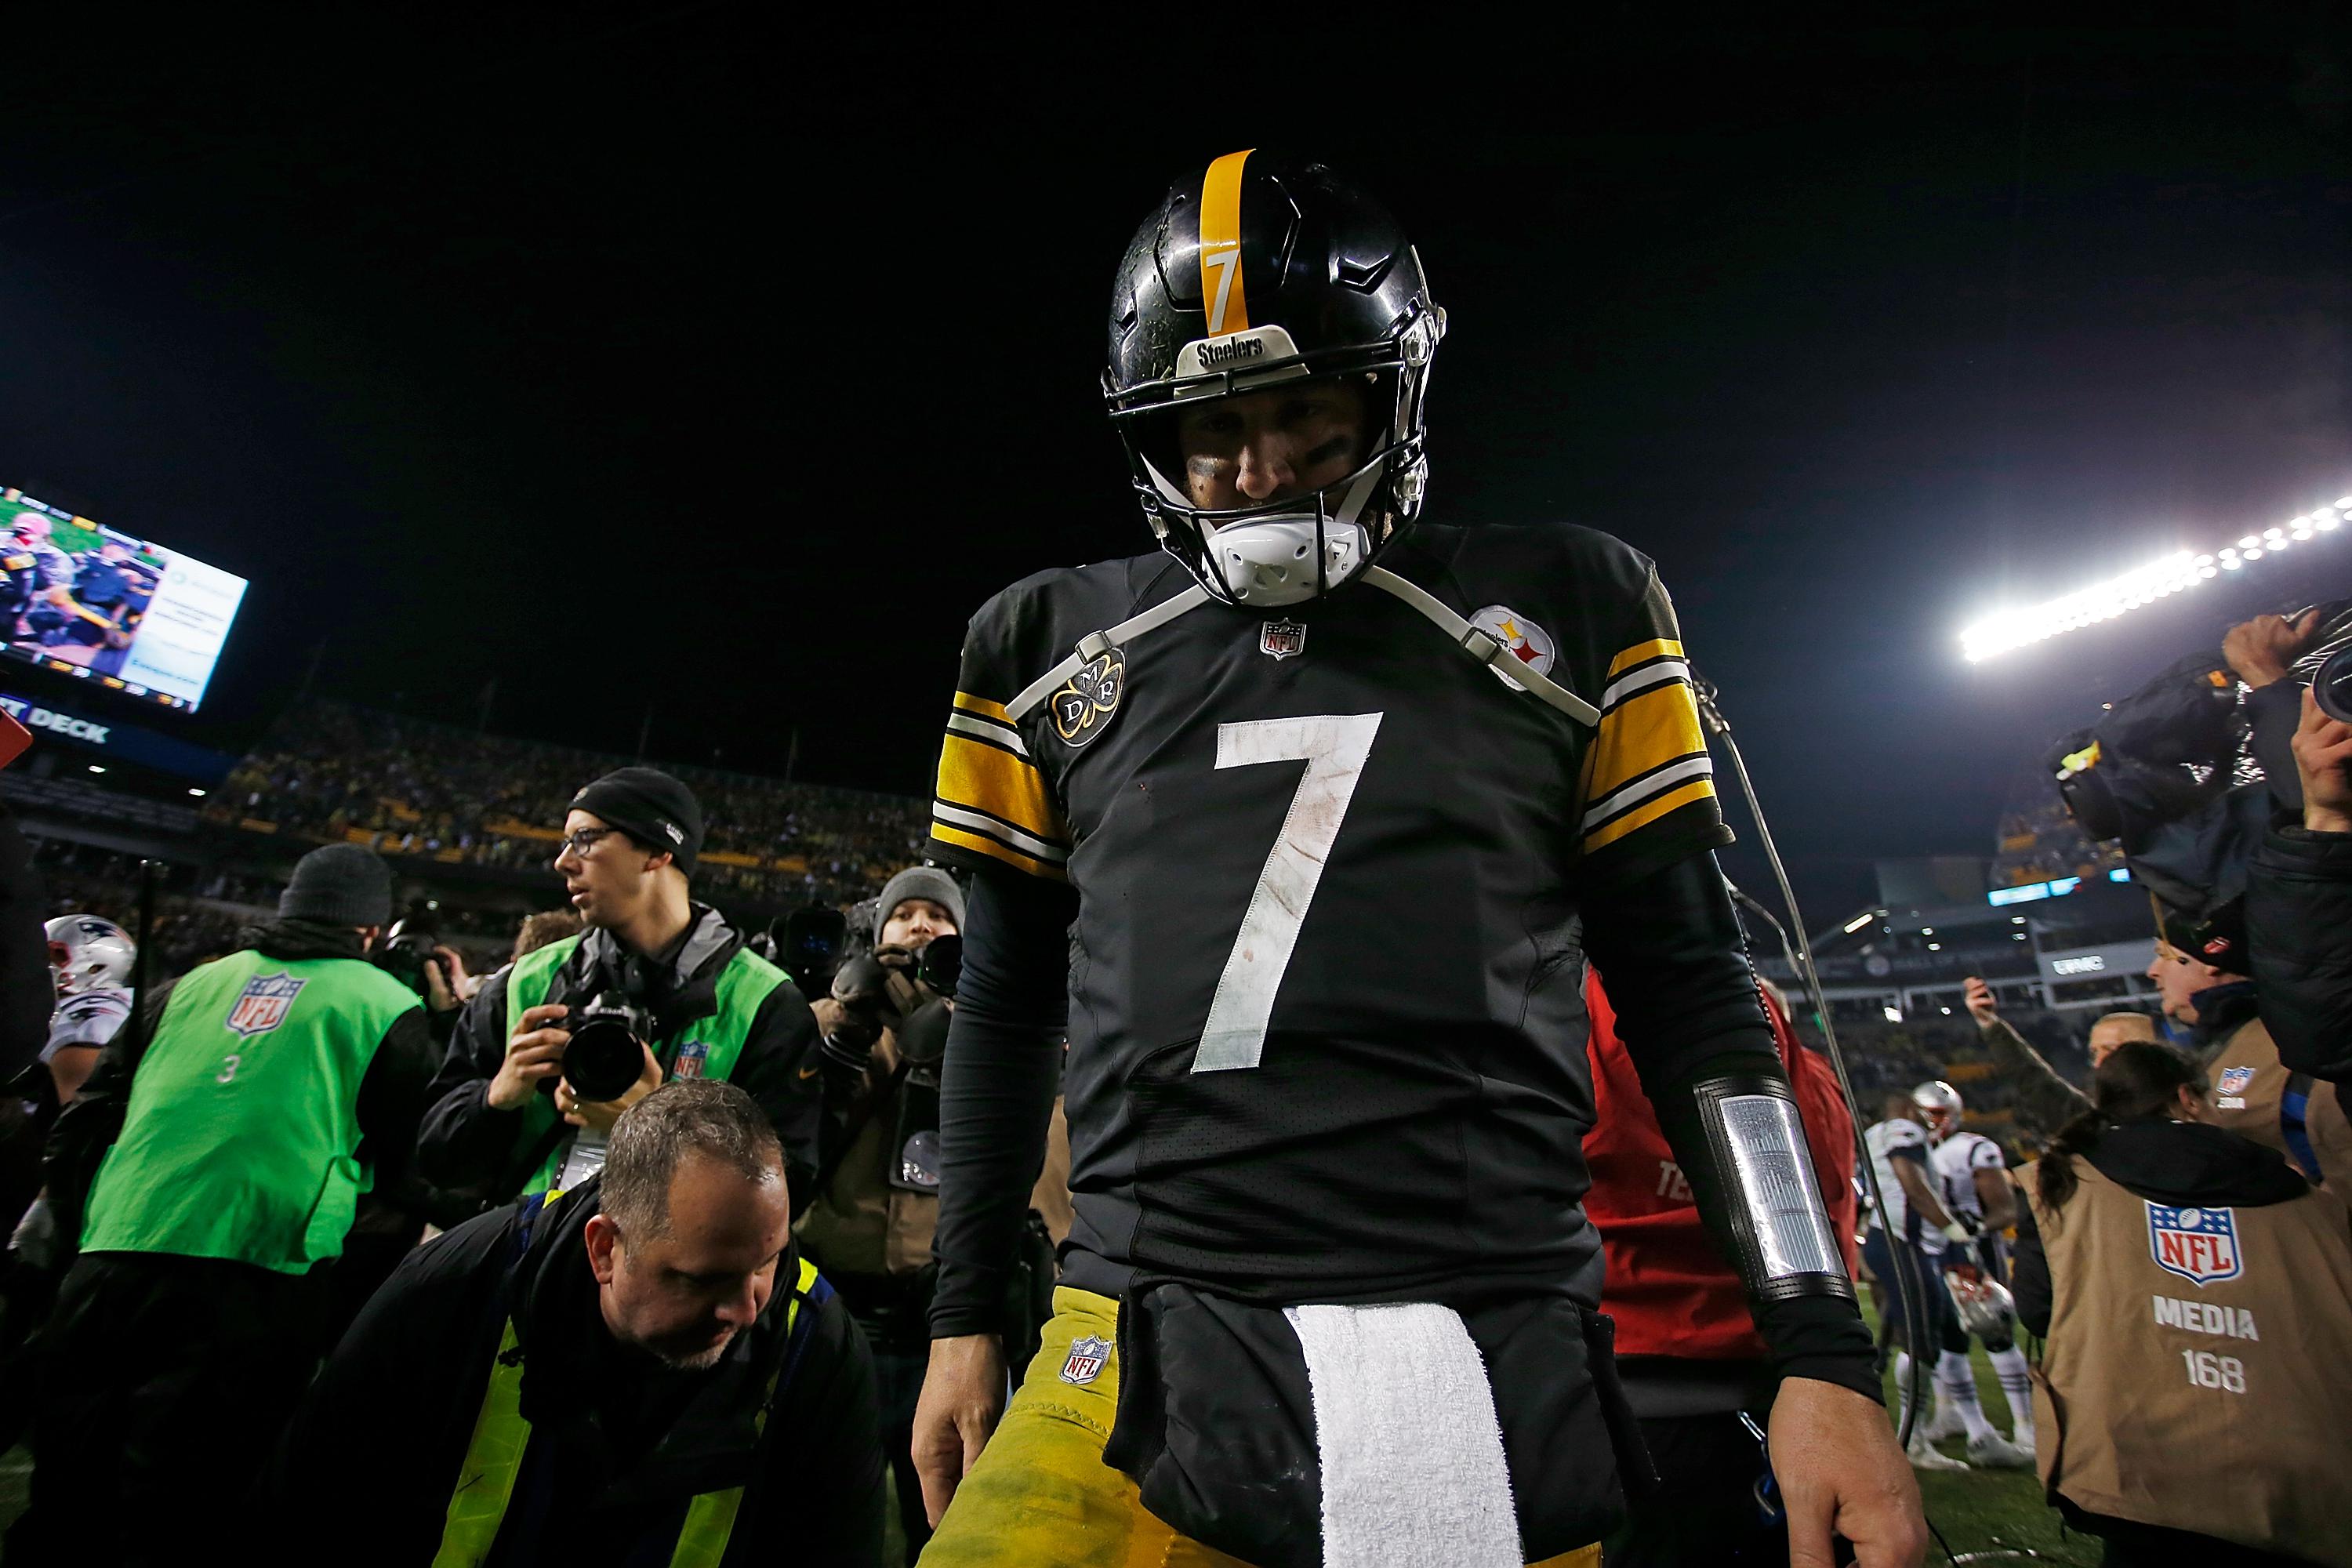 PITTSBURGH, PA - DECEMBER 17: Ben Roethlisberger #7 of the Pittsburgh Steelers walks off the field at the conclusion of the New England Patriots 27-24 win over the Pittsburgh Steelers at Heinz Field on December 17, 2017 in Pittsburgh, Pennsylvania. (Photo by Justin K. Aller/Getty Images)